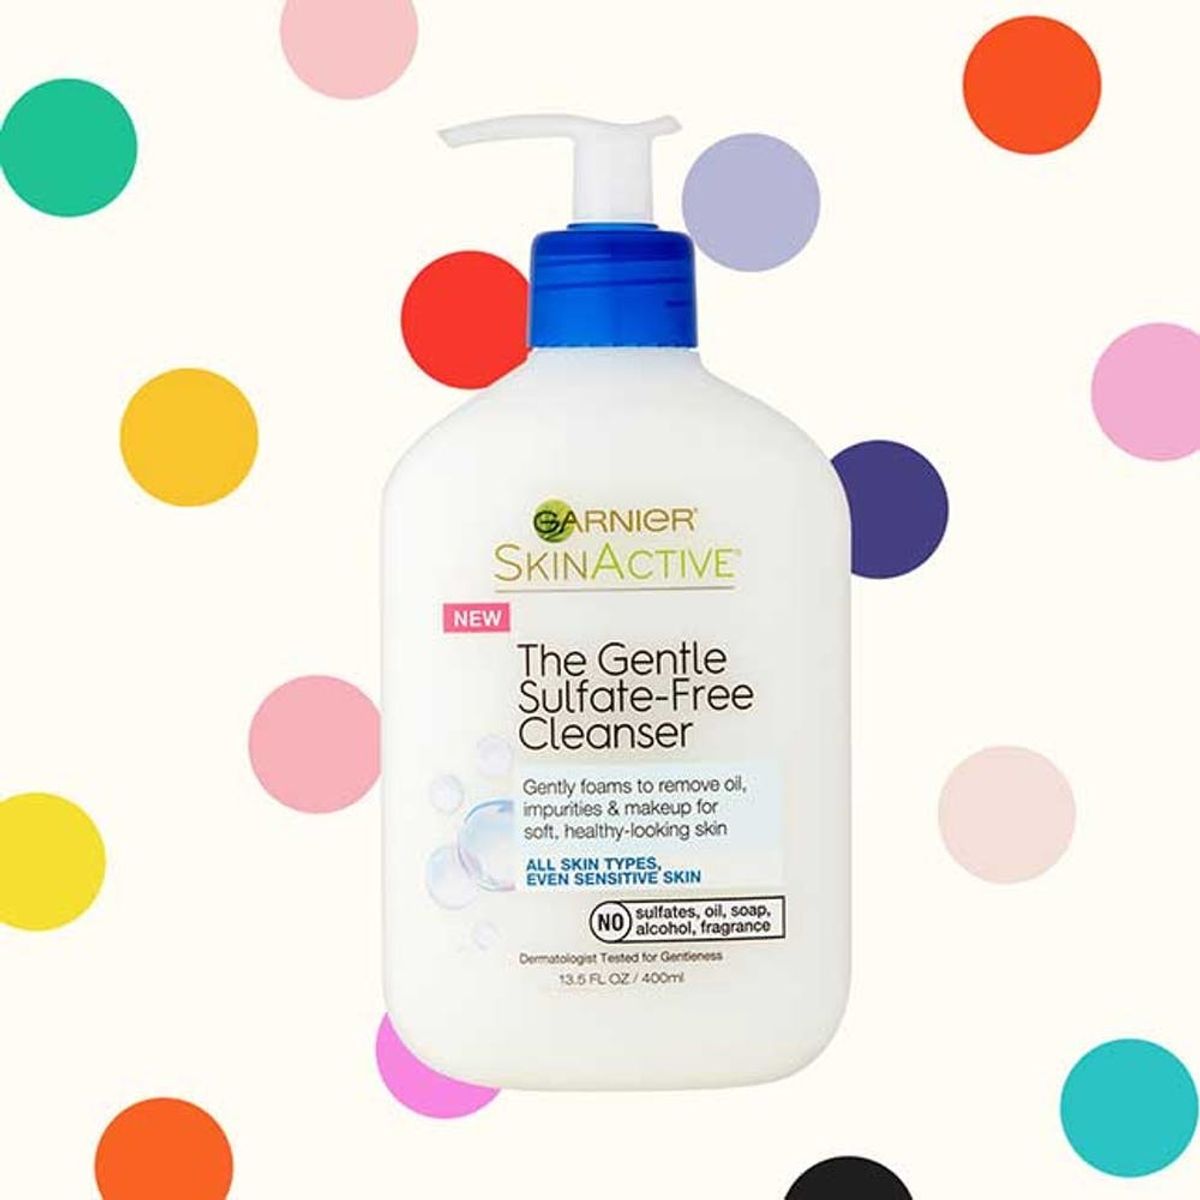 I Ditched My Pricey Face Wash for This $13 Drugstore Buy